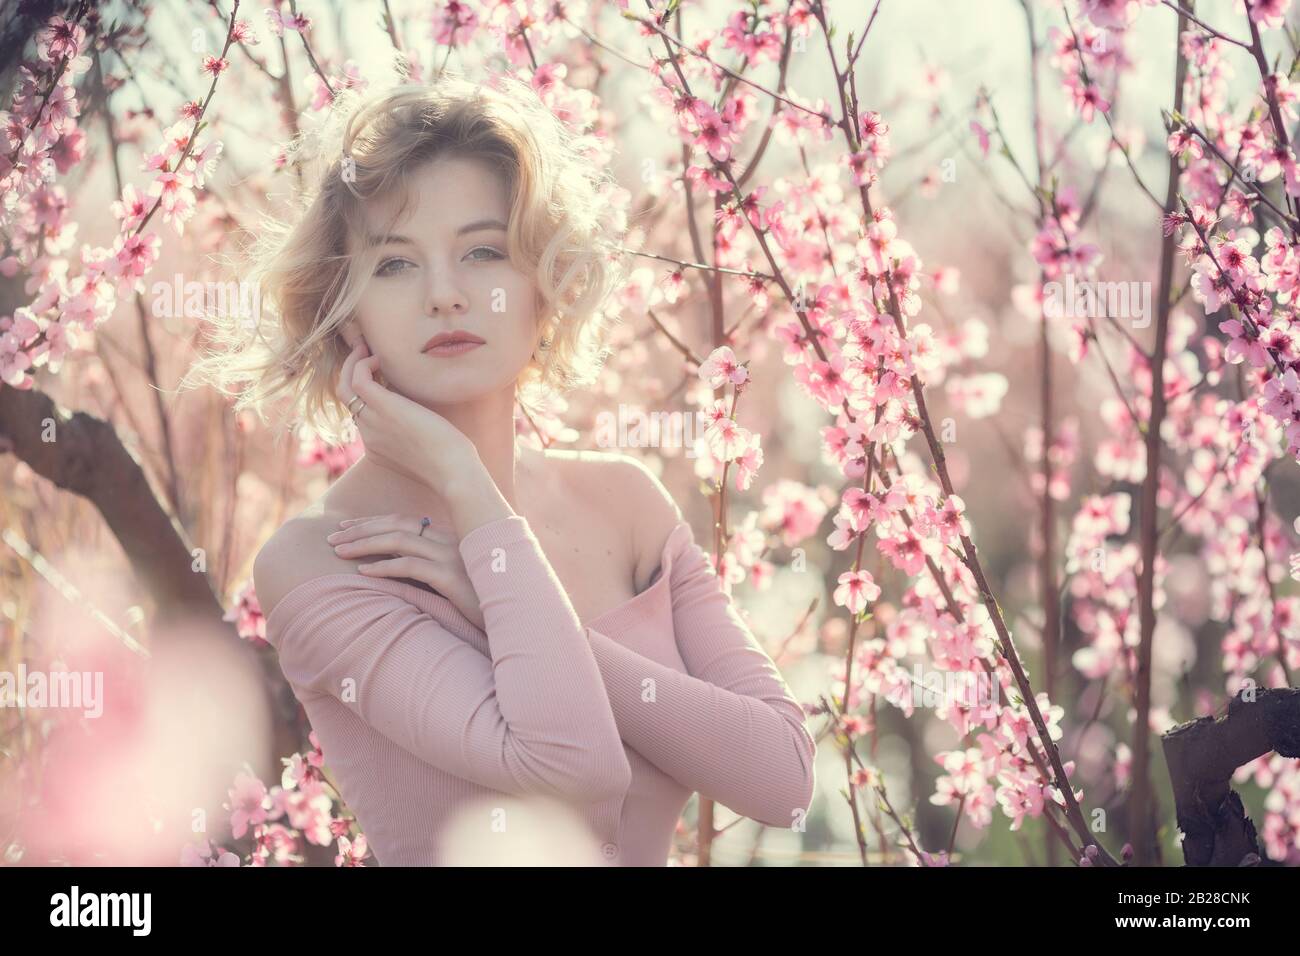 fashion outdoor photo of gorgeous young woman in elegant dress posing in garden with blossom peach trees. Blonde in flowering gardens Stock Photo